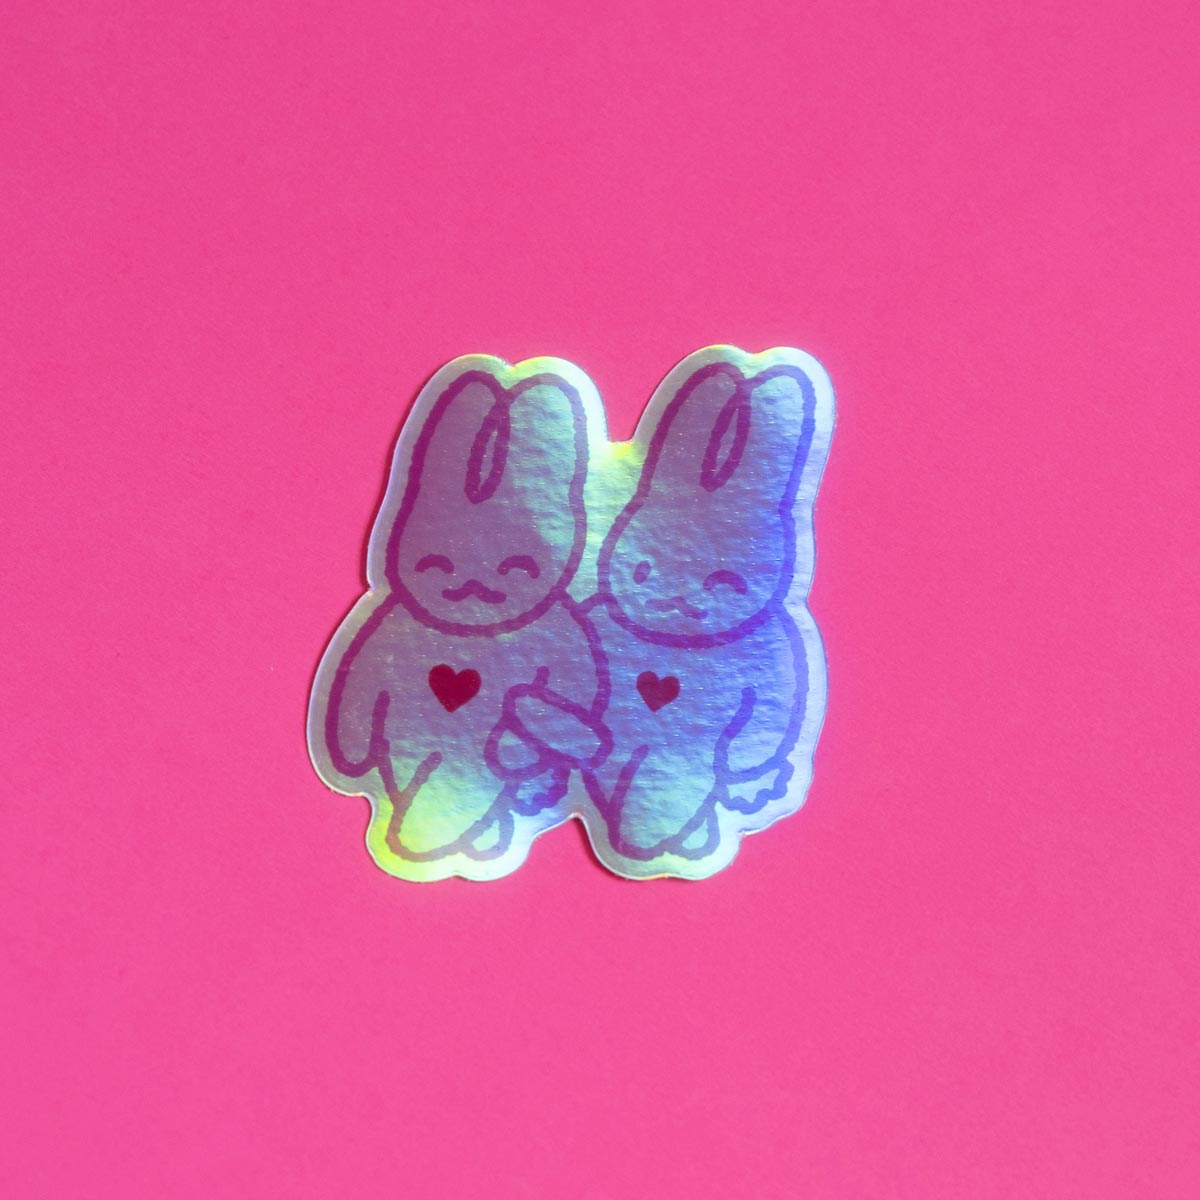 Holographic fusional bunnies sticker 3"